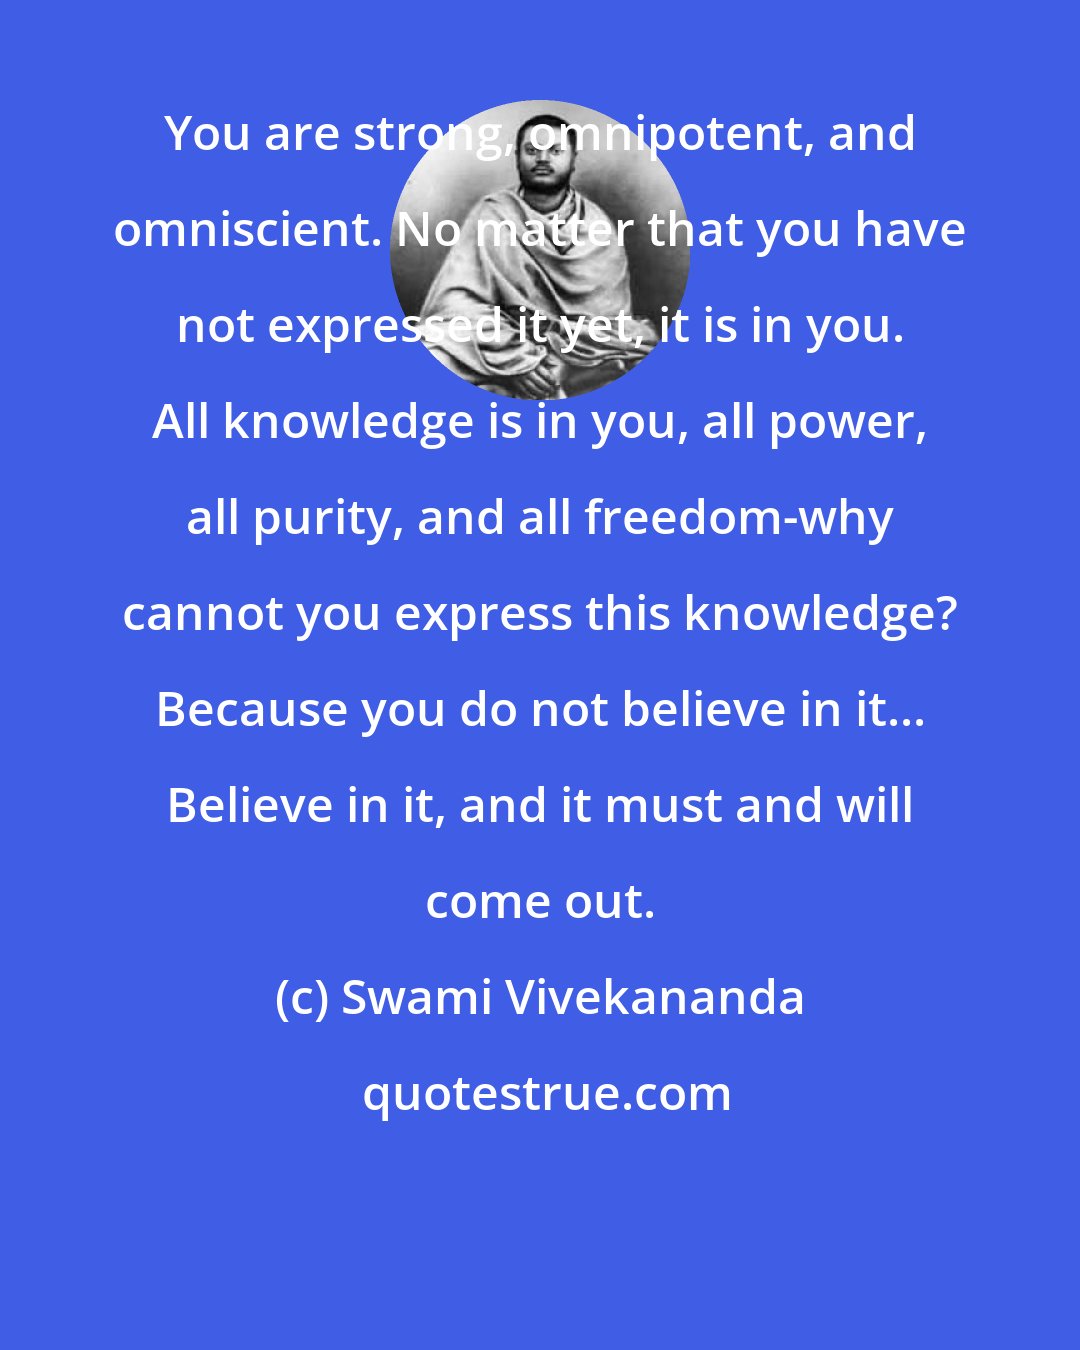 Swami Vivekananda: You are strong, omnipotent, and omniscient. No matter that you have not expressed it yet, it is in you. All knowledge is in you, all power, all purity, and all freedom-why cannot you express this knowledge? Because you do not believe in it... Believe in it, and it must and will come out.